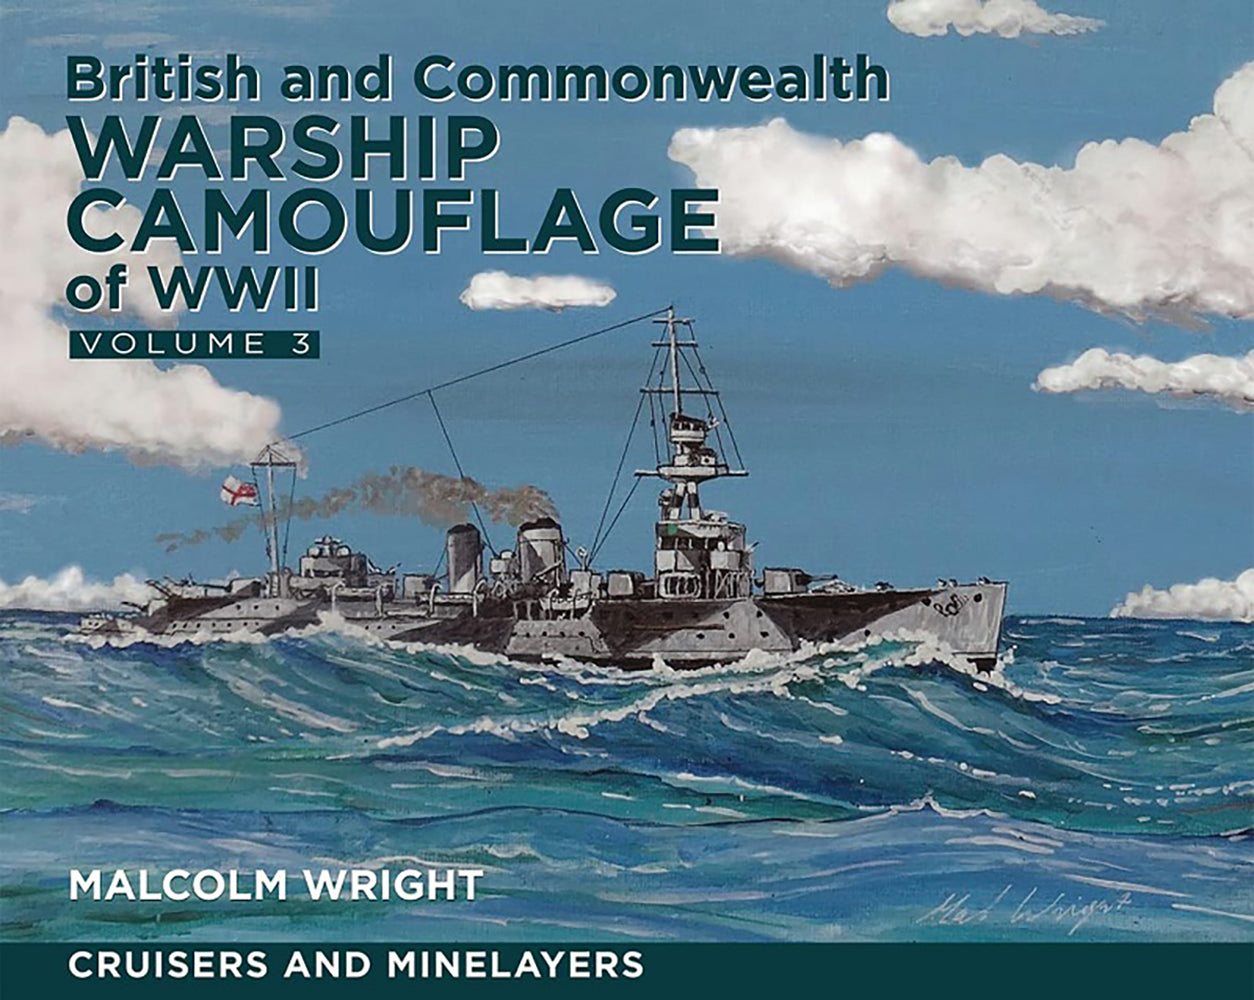 British and Commonwealth Warship Camouflage of WWII [Vol. 3]: Cruisers and minelayers